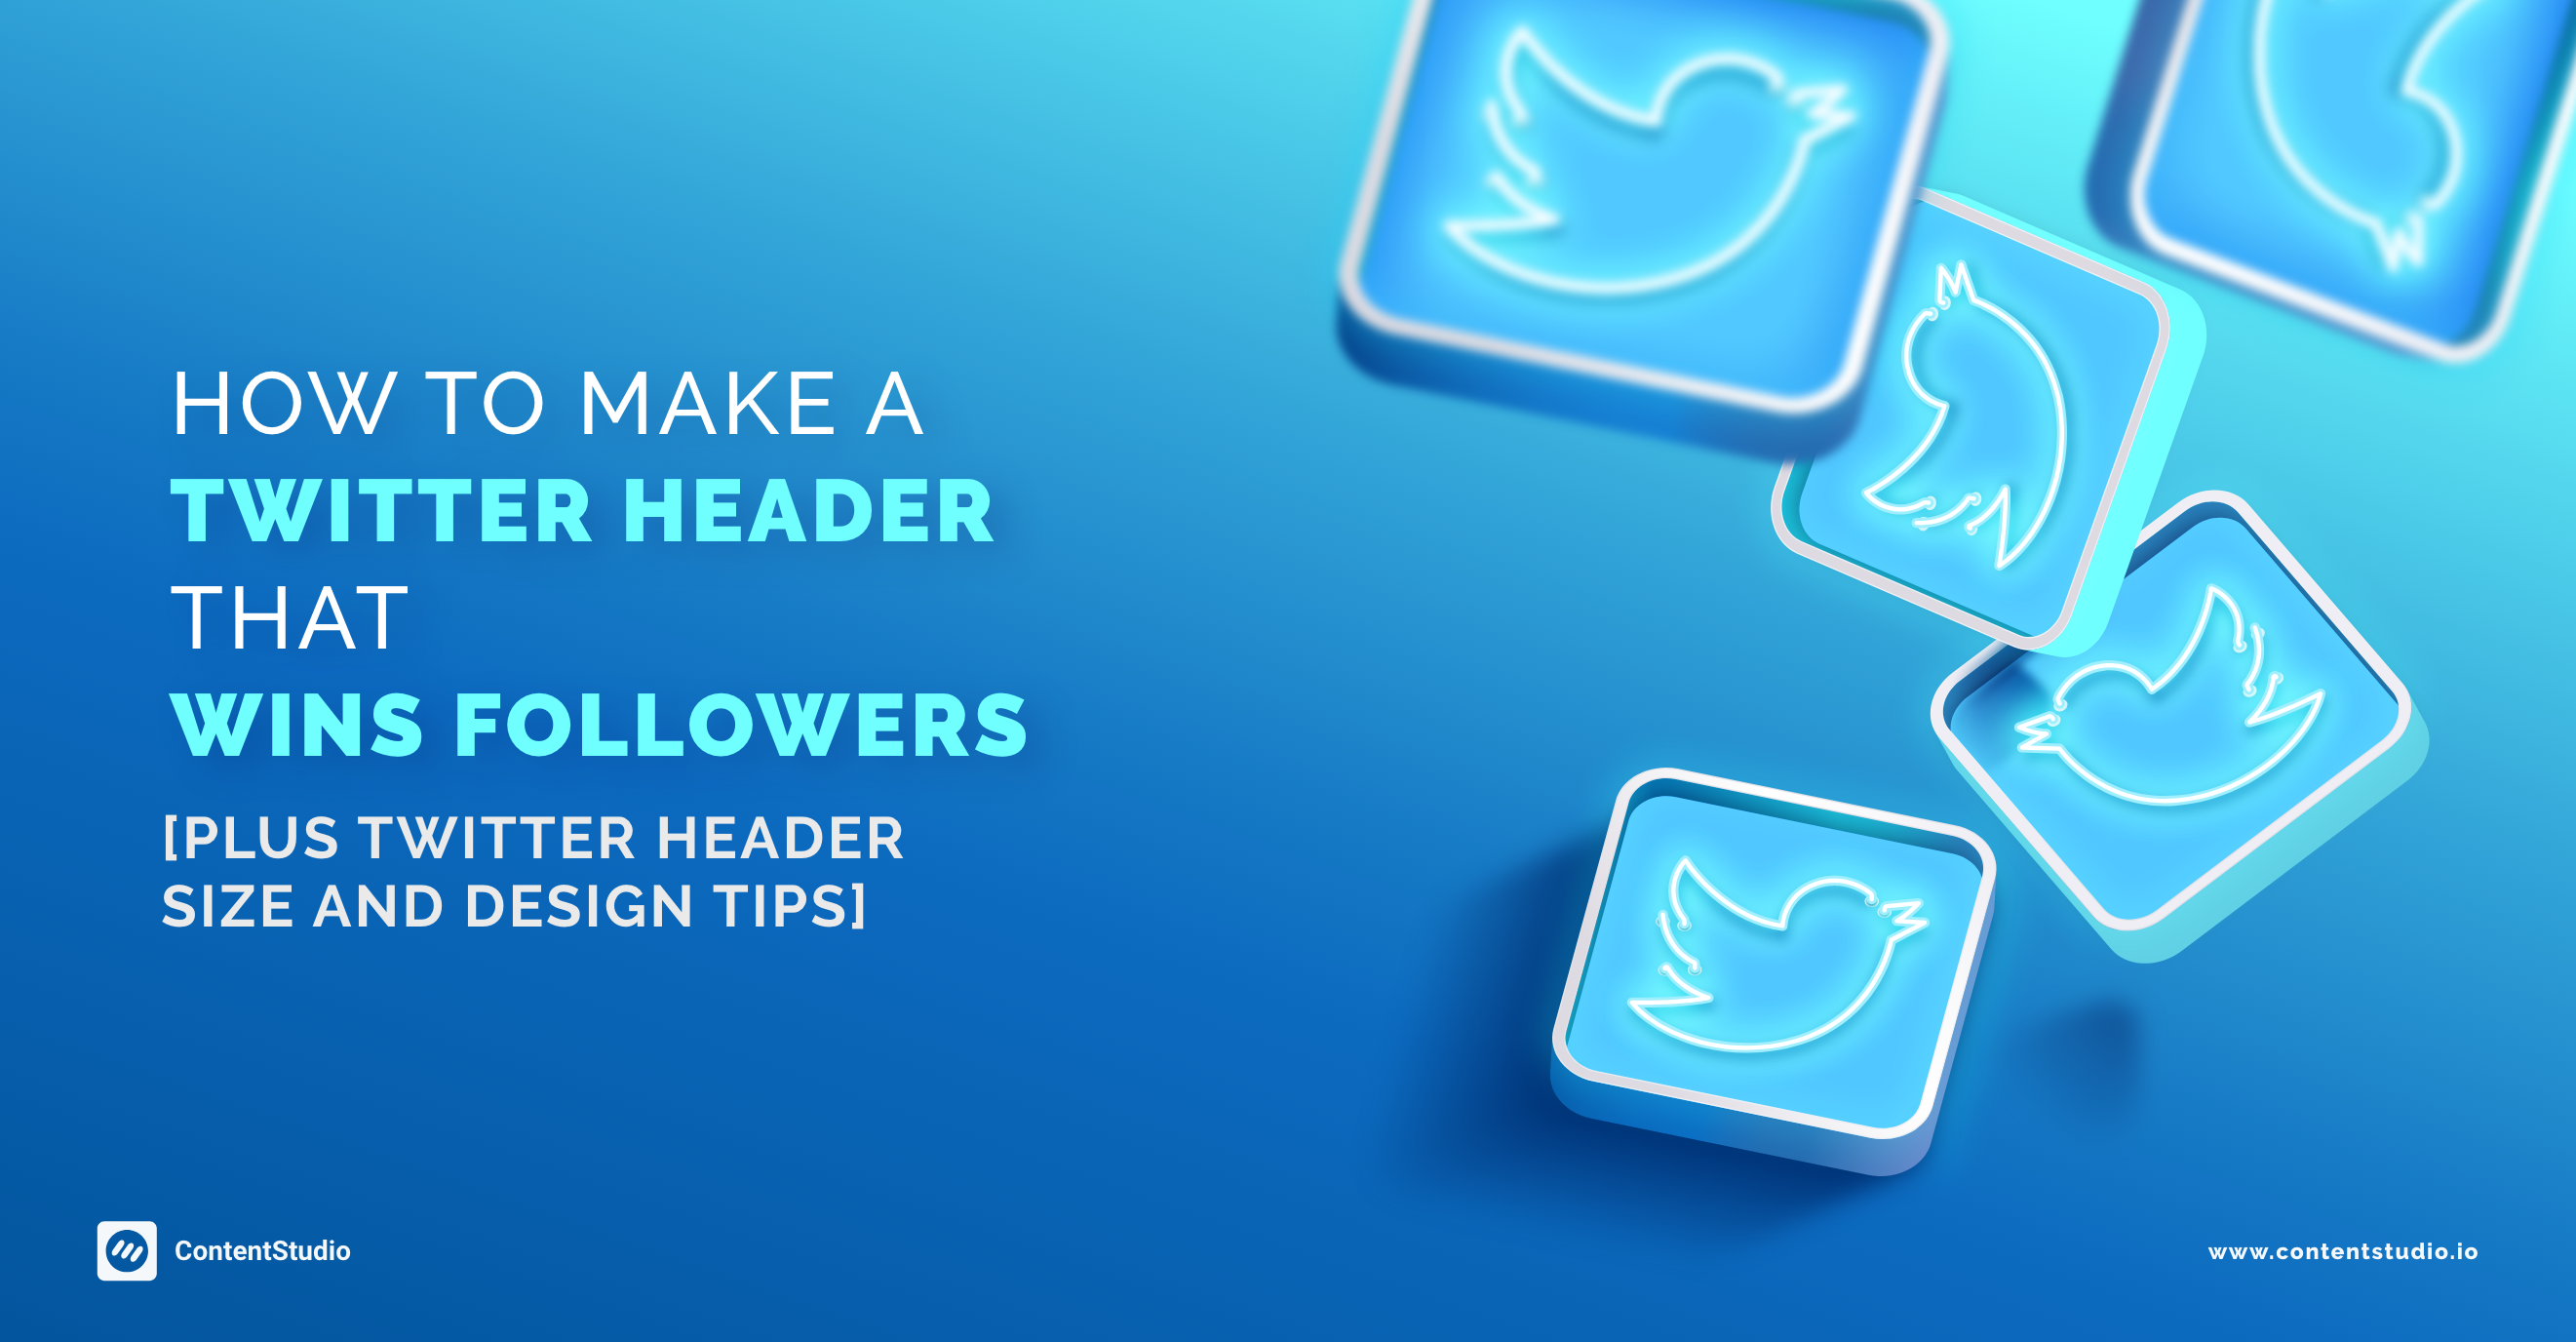 How to Make a Twitter Header/Banner That Wins Followers [Plus Twitter Header Size And Design Tips]